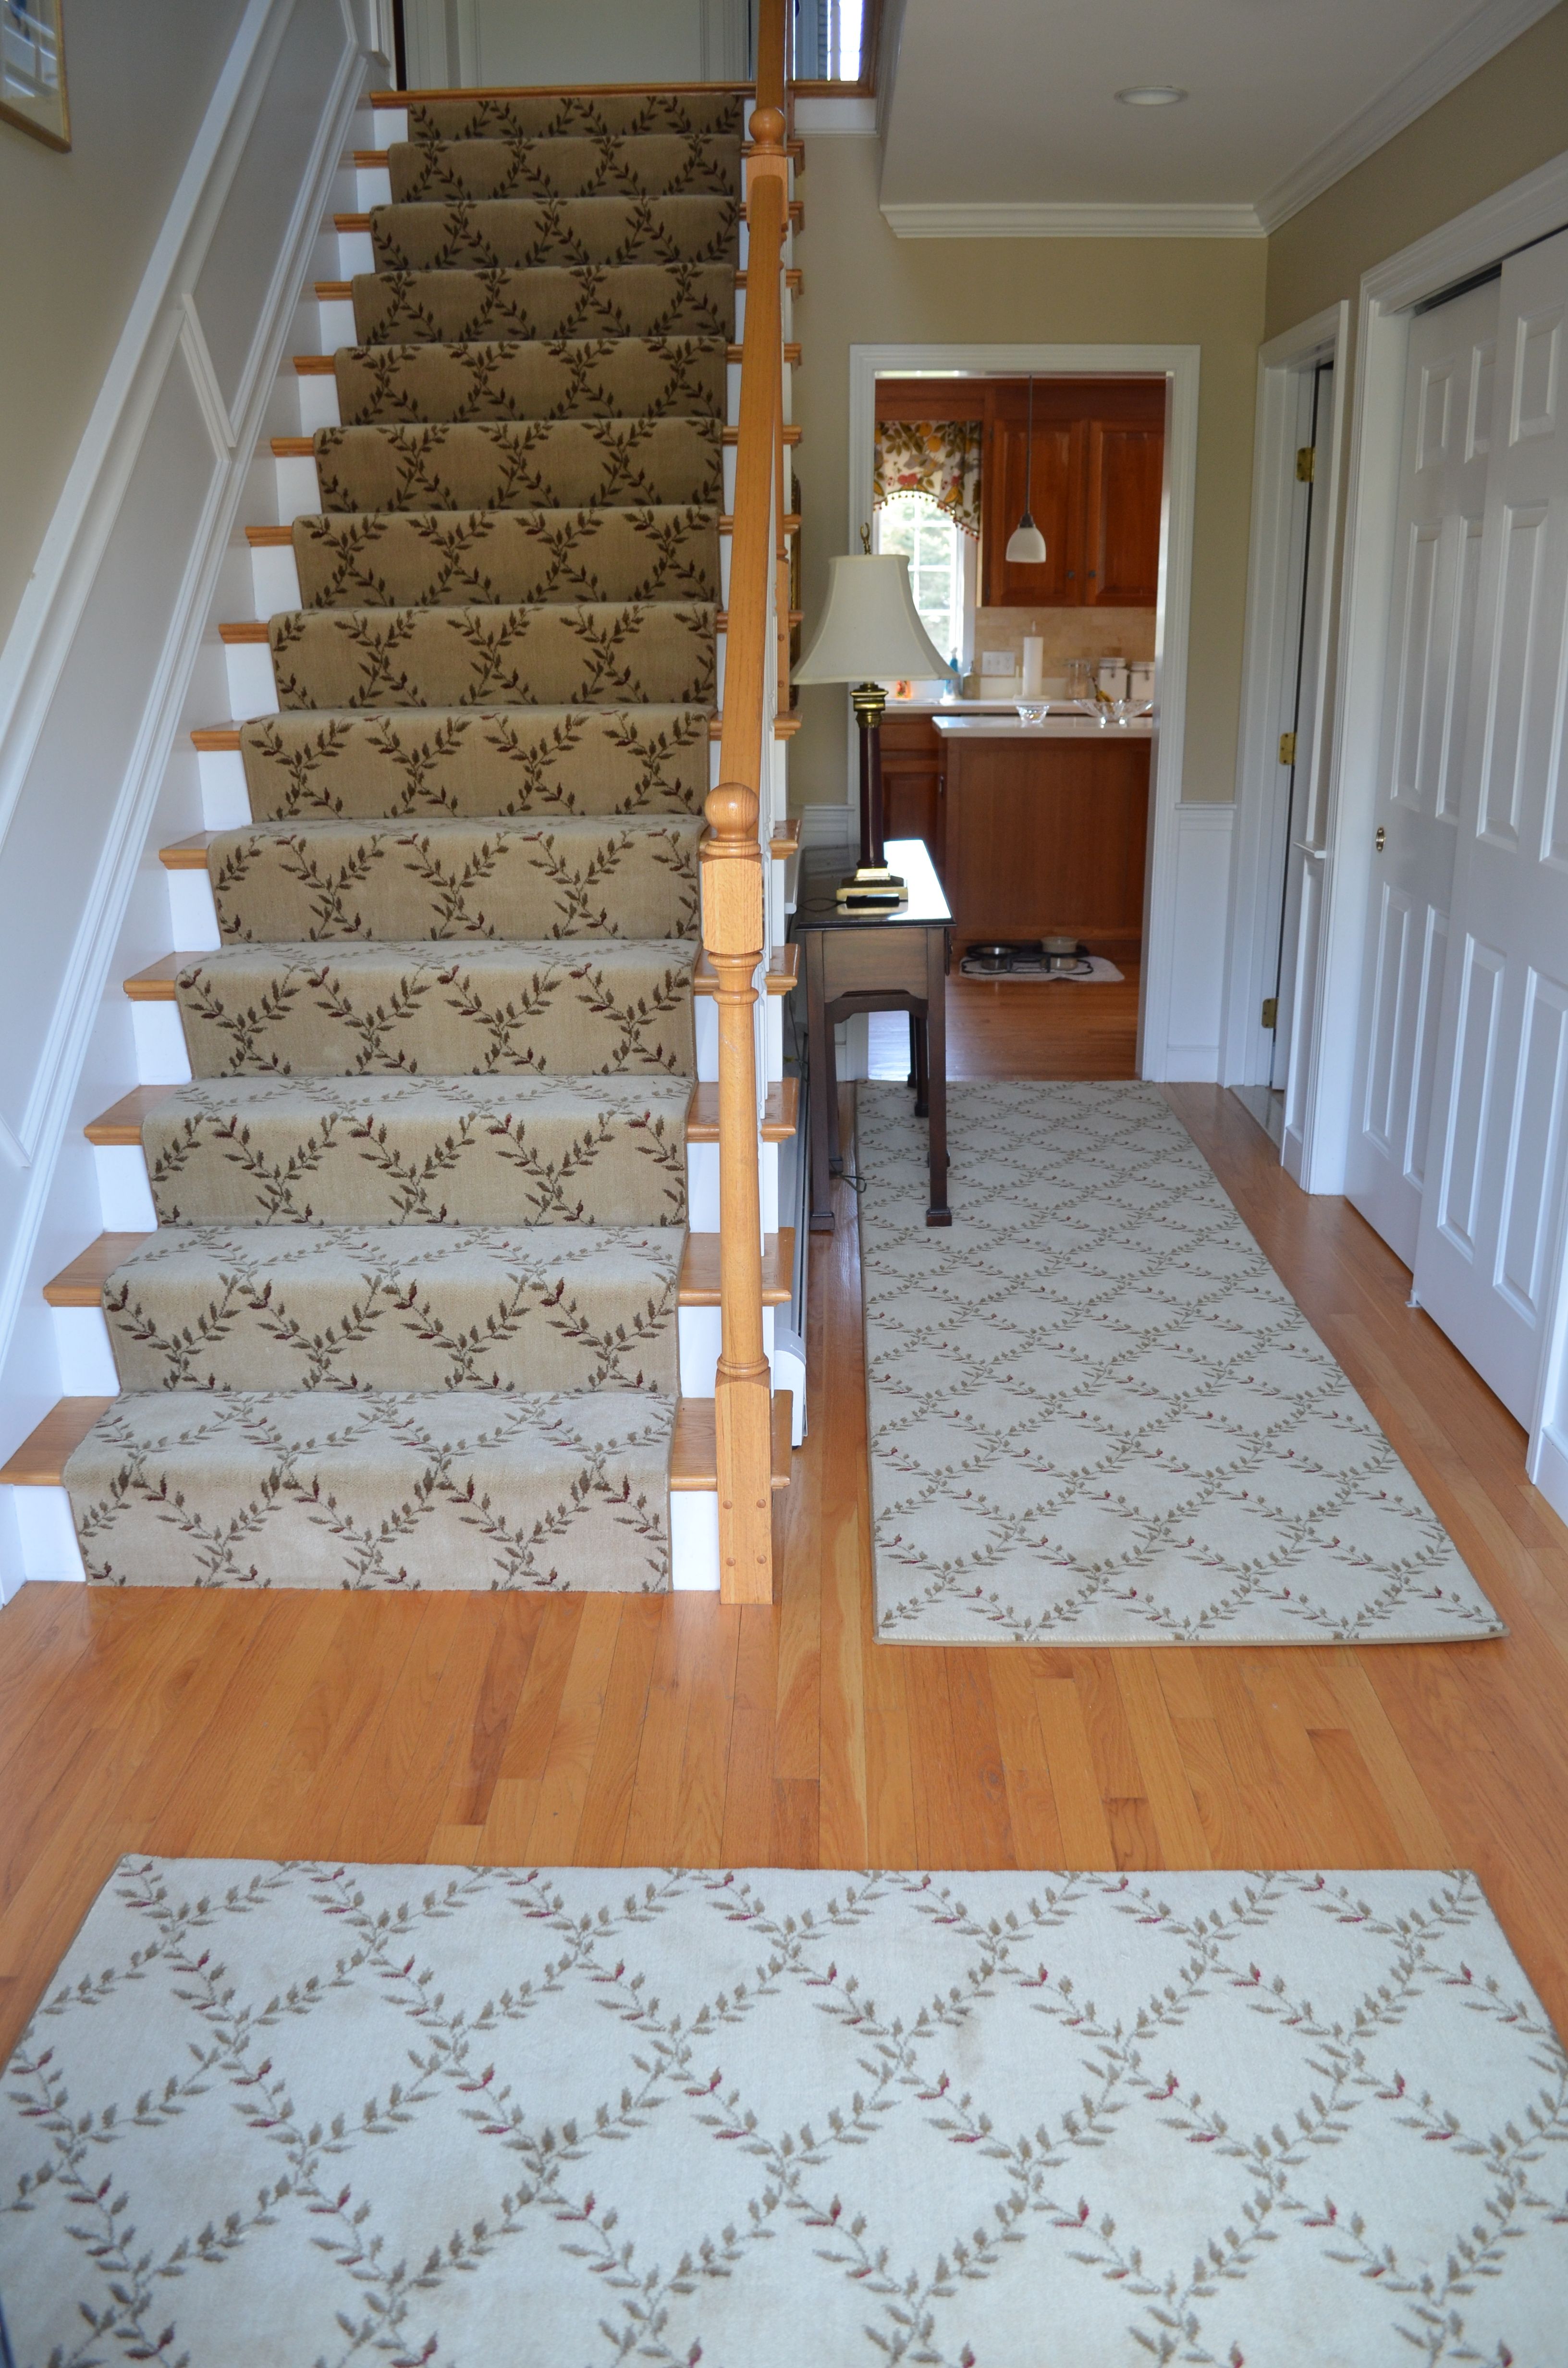 Carpet Runner For Stairs Regarding Runners For The Hallway (View 16 of 20)